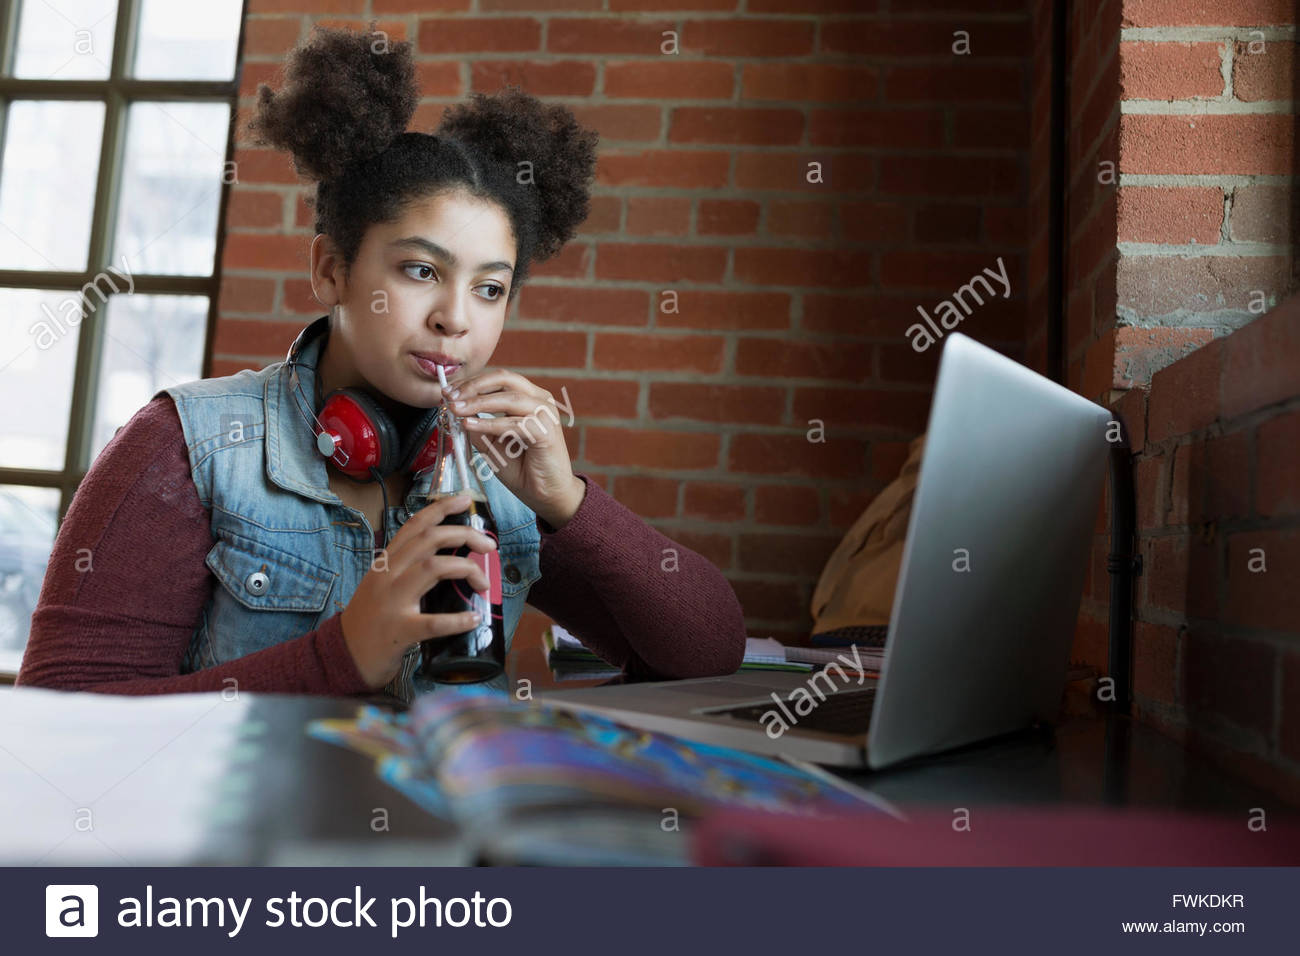 Girl sipping soda from straw at laptop in coffee shop Stock Photo